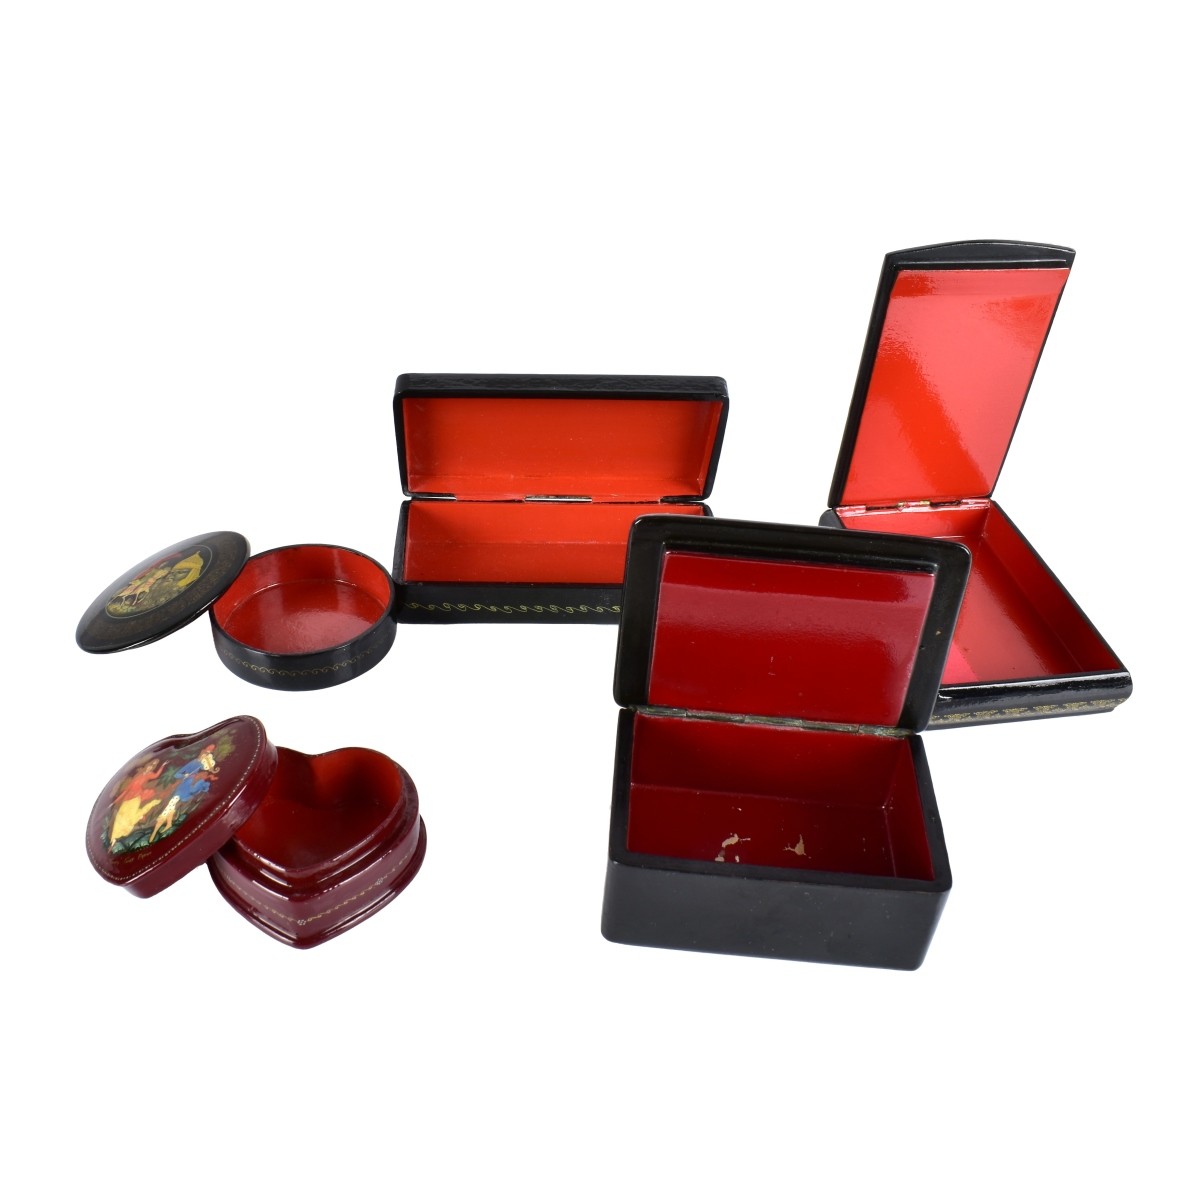 Russian Lacquered Wooden Boxes